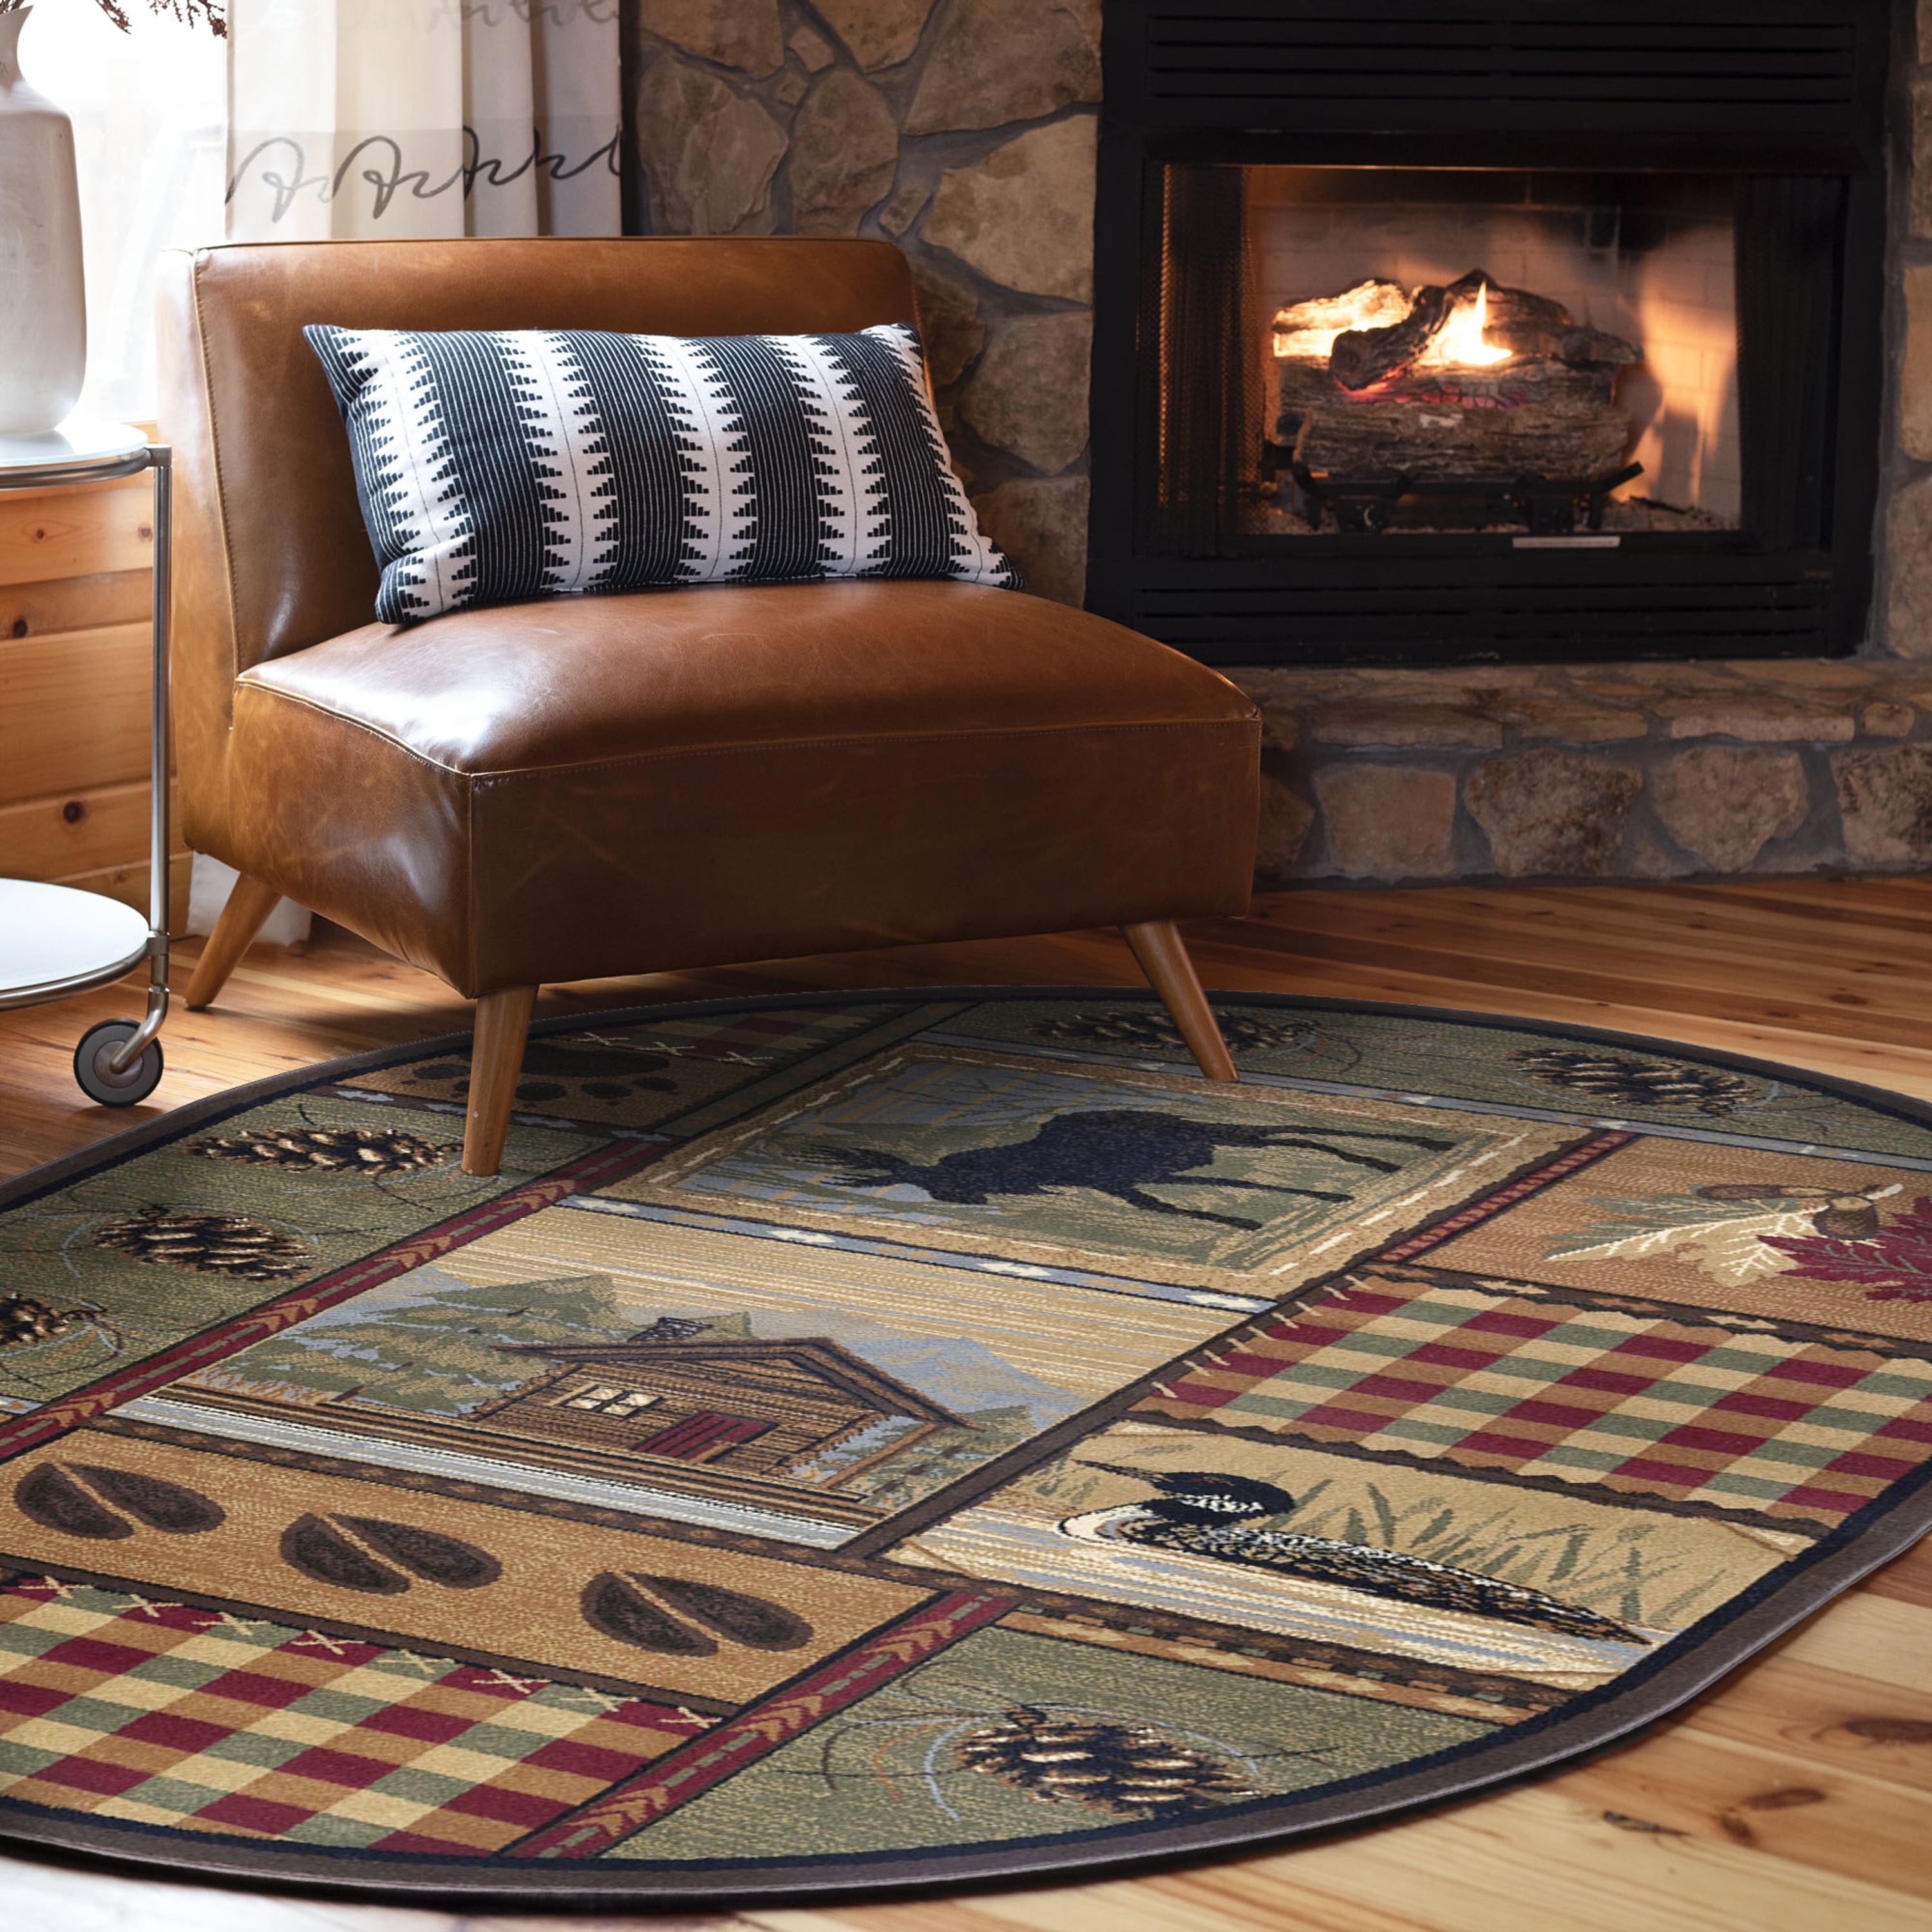 3x4 Oval Novelty Multi-Color Oval Area Rugs for Living Room